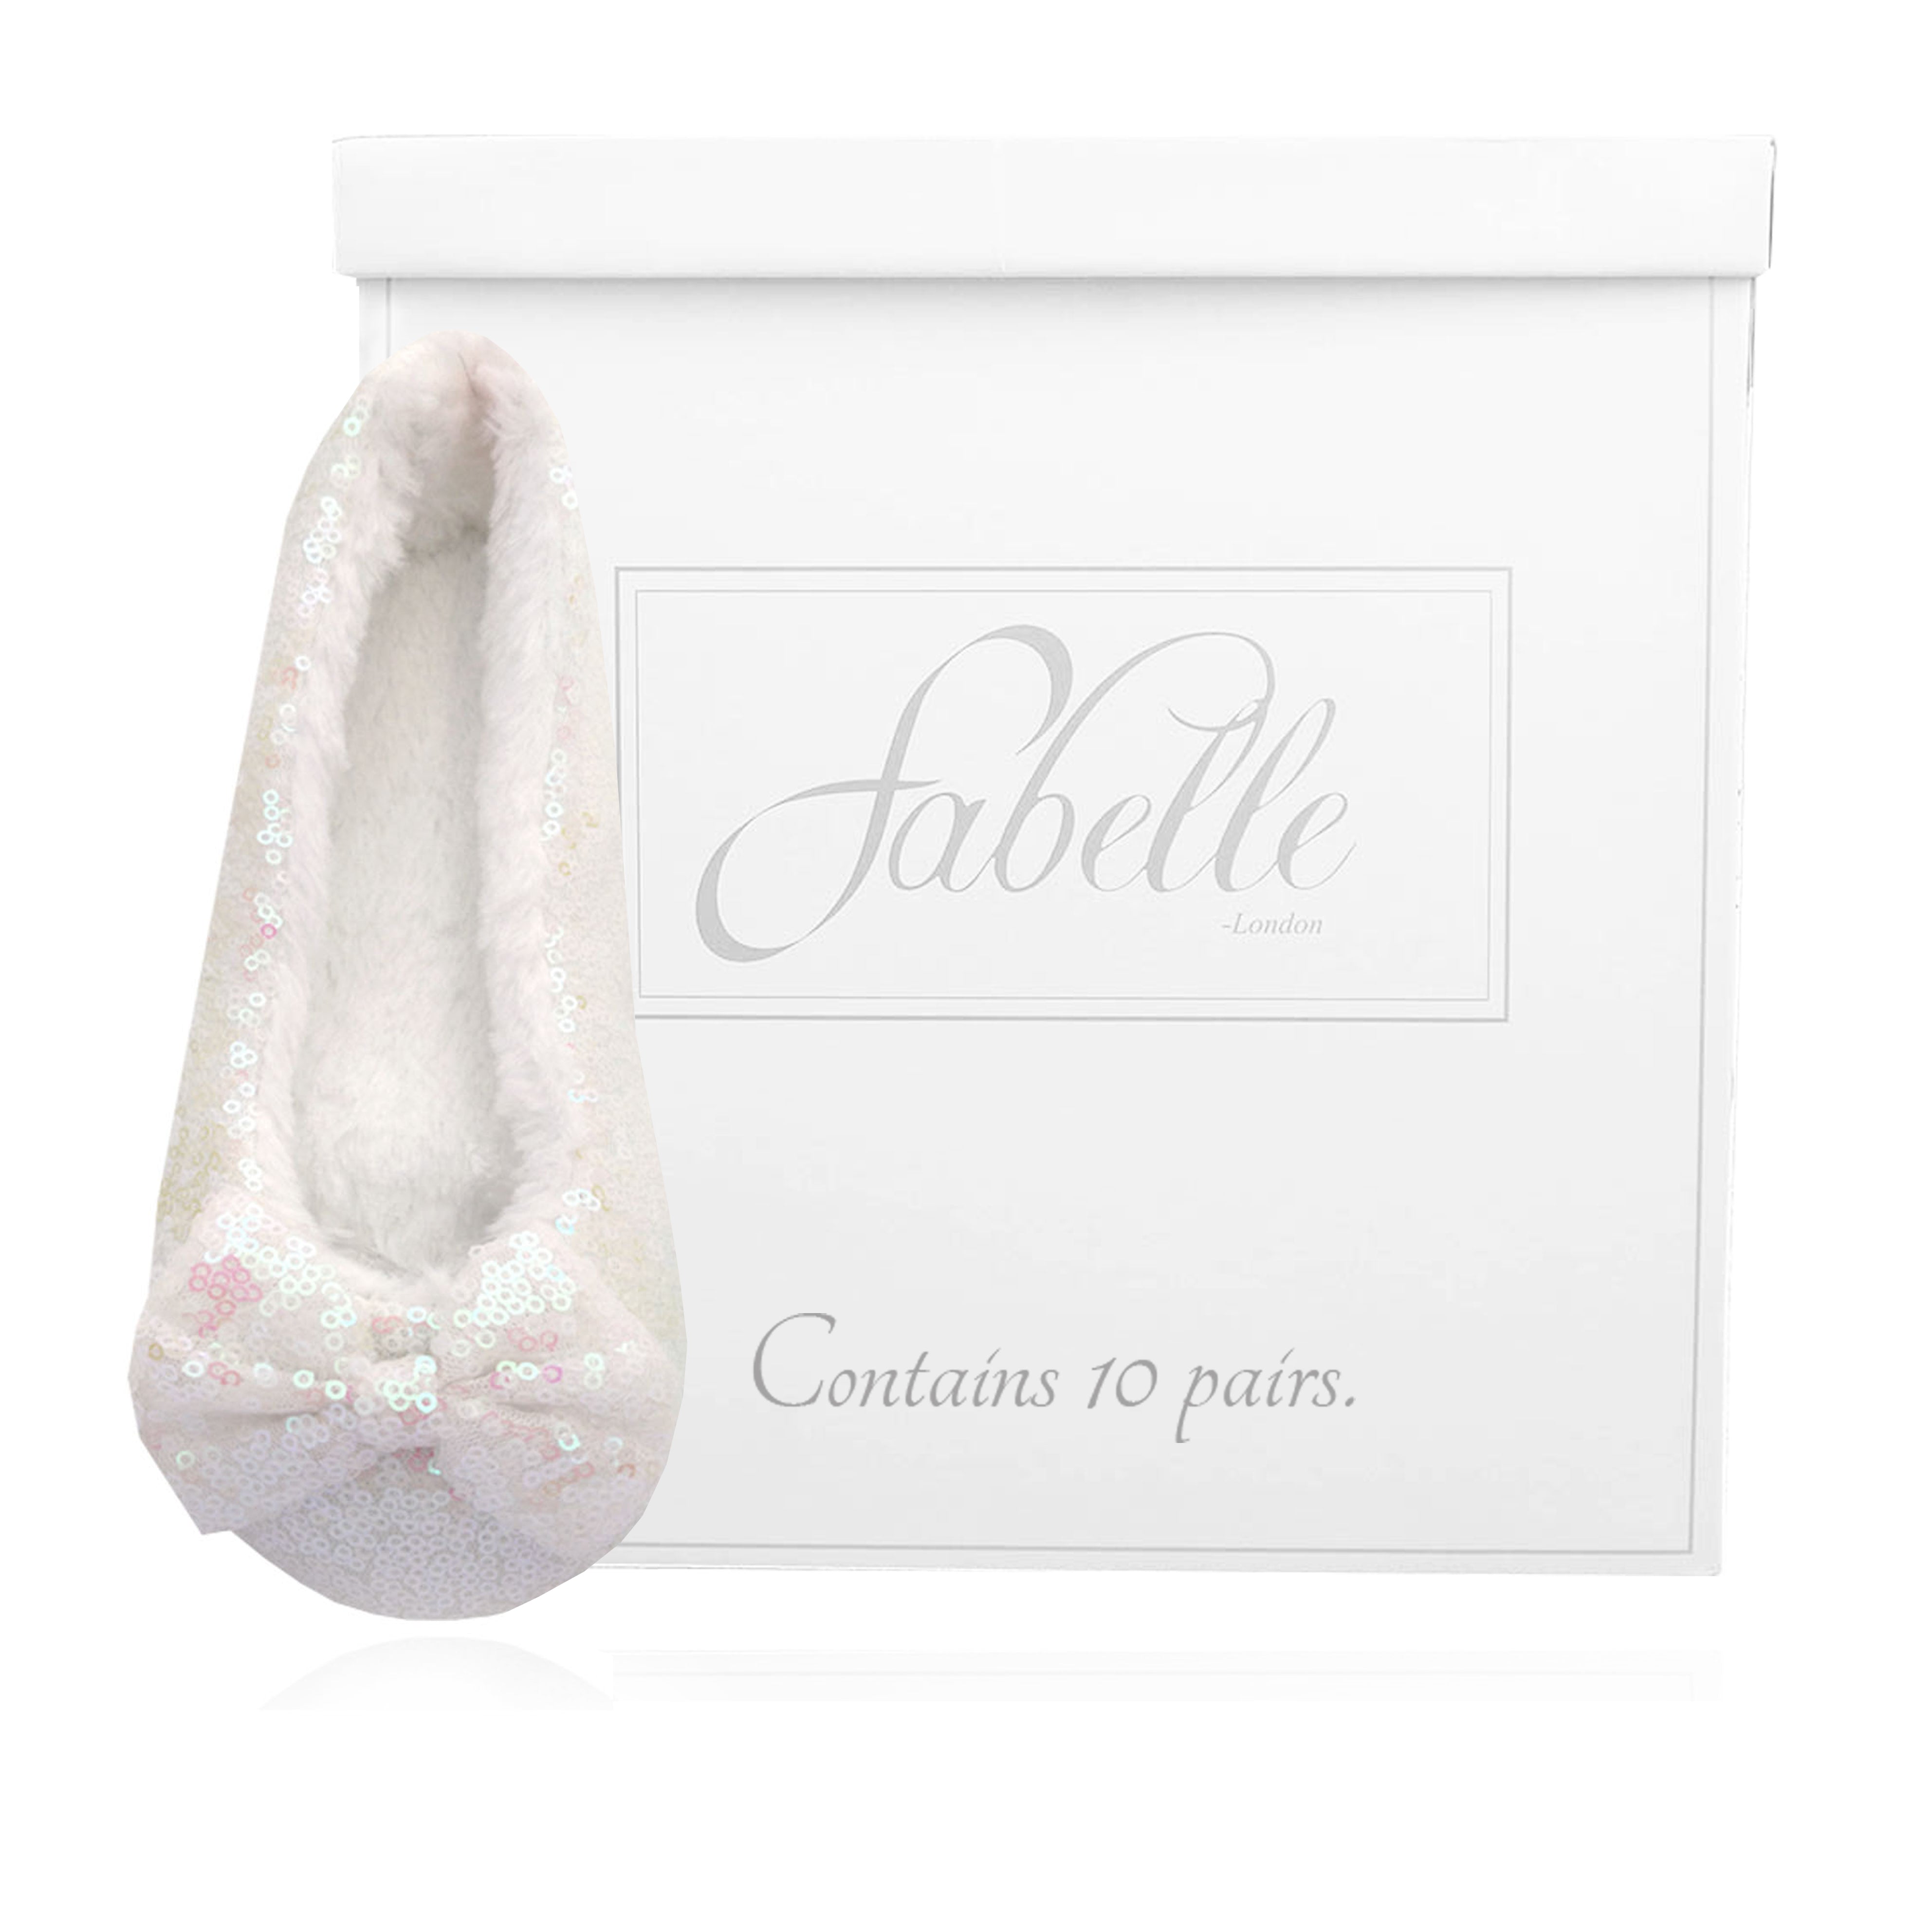 10 Pairs of luxury sequin slippers in a Party box